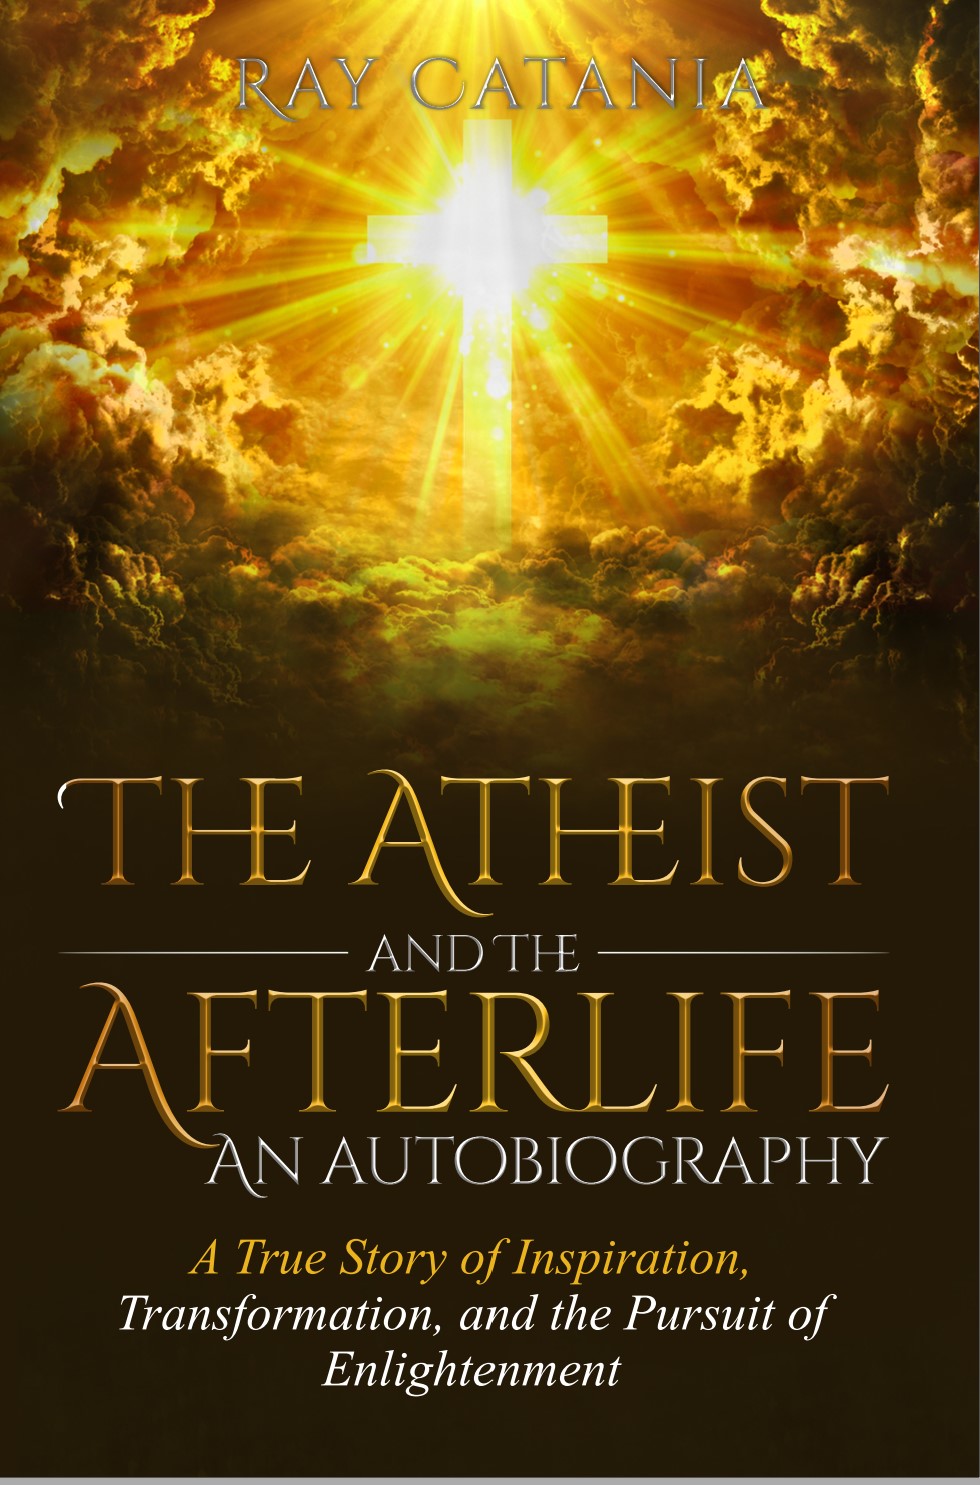 The Atheist and The Afterlife: A Story That Could Change Your Life and Death